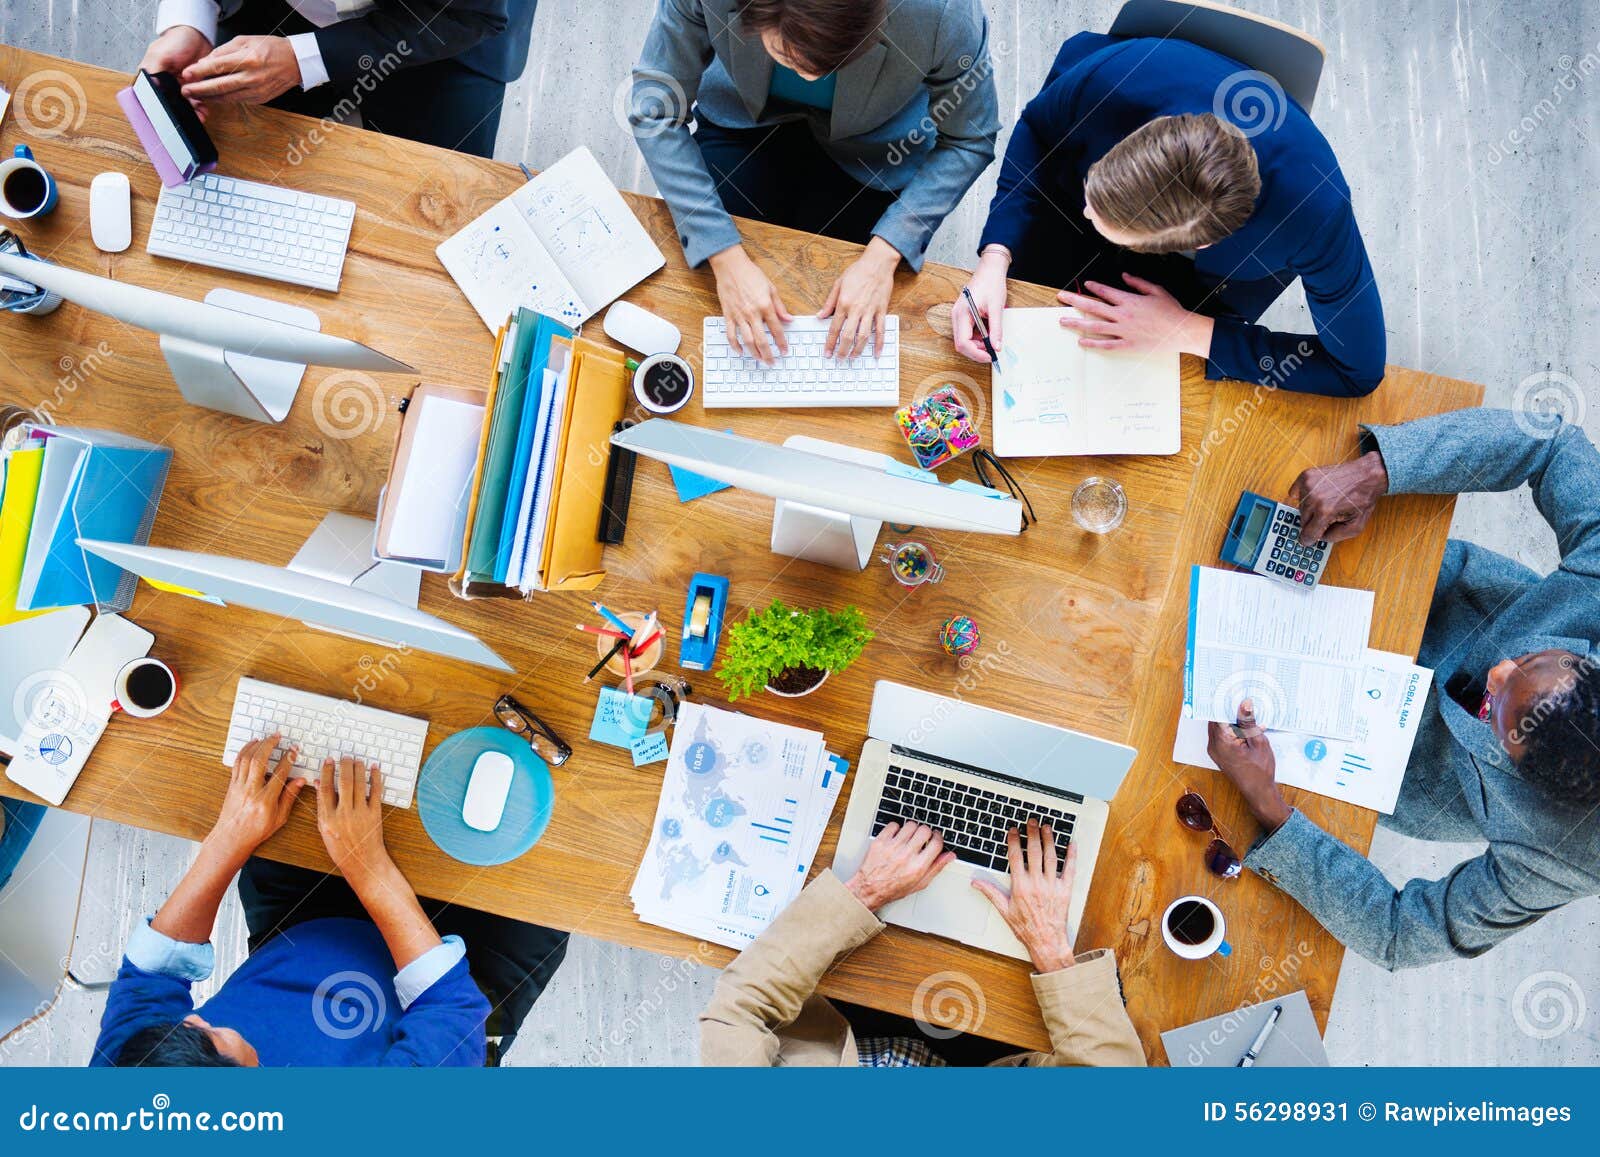 business people working office corporate team concept